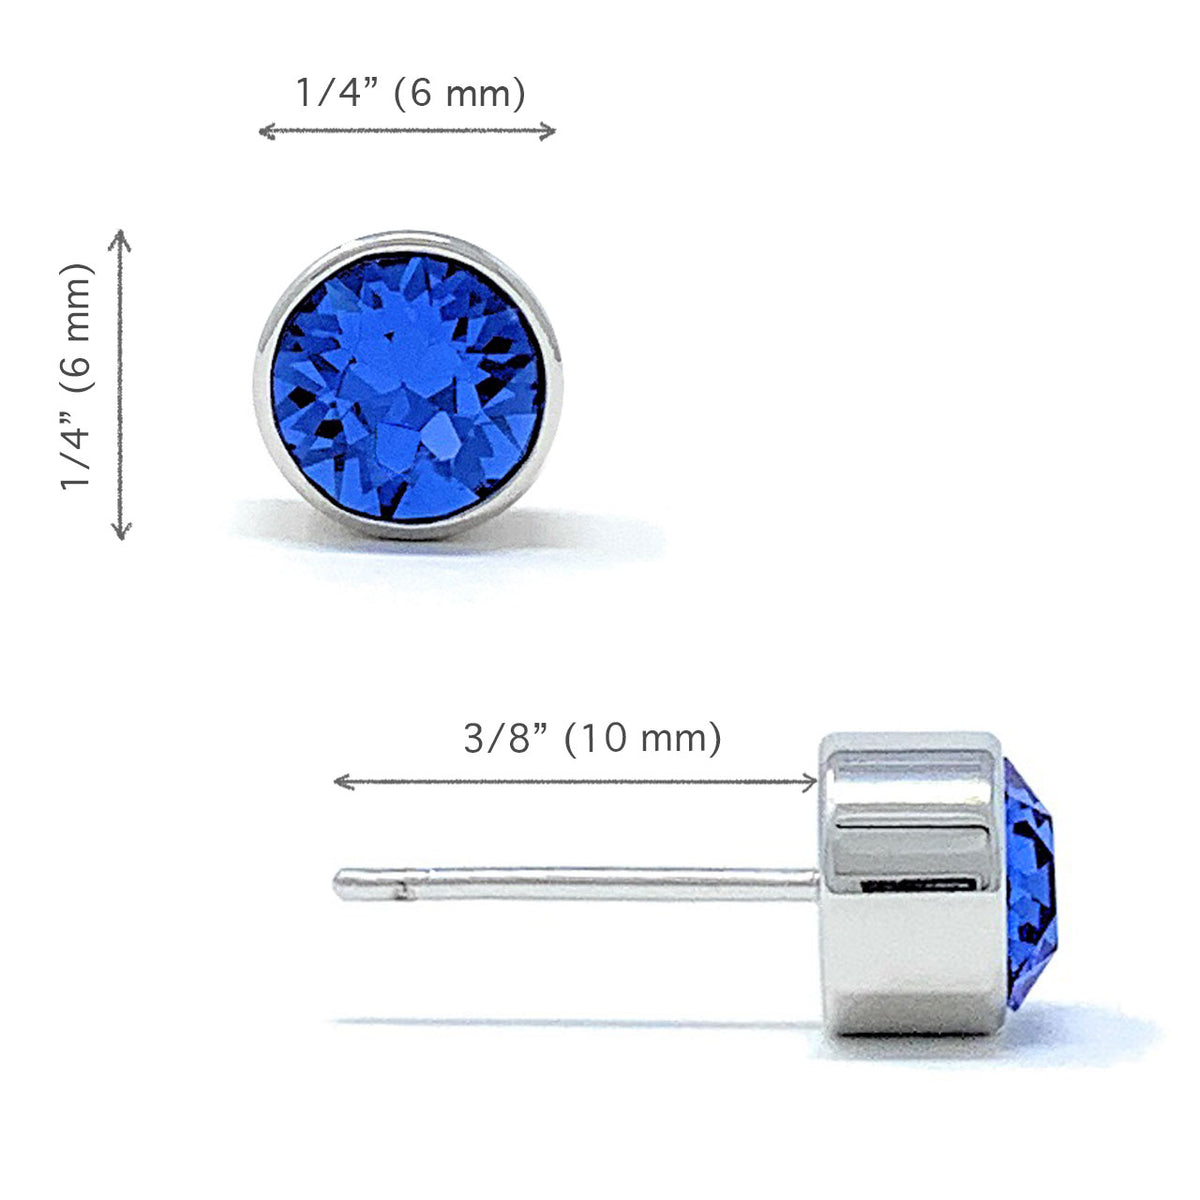 Harley Small Stud Earrings with Blue Sapphire Round Crystals from Swarovski Silver Toned Rhodium Plated - Ed Heart